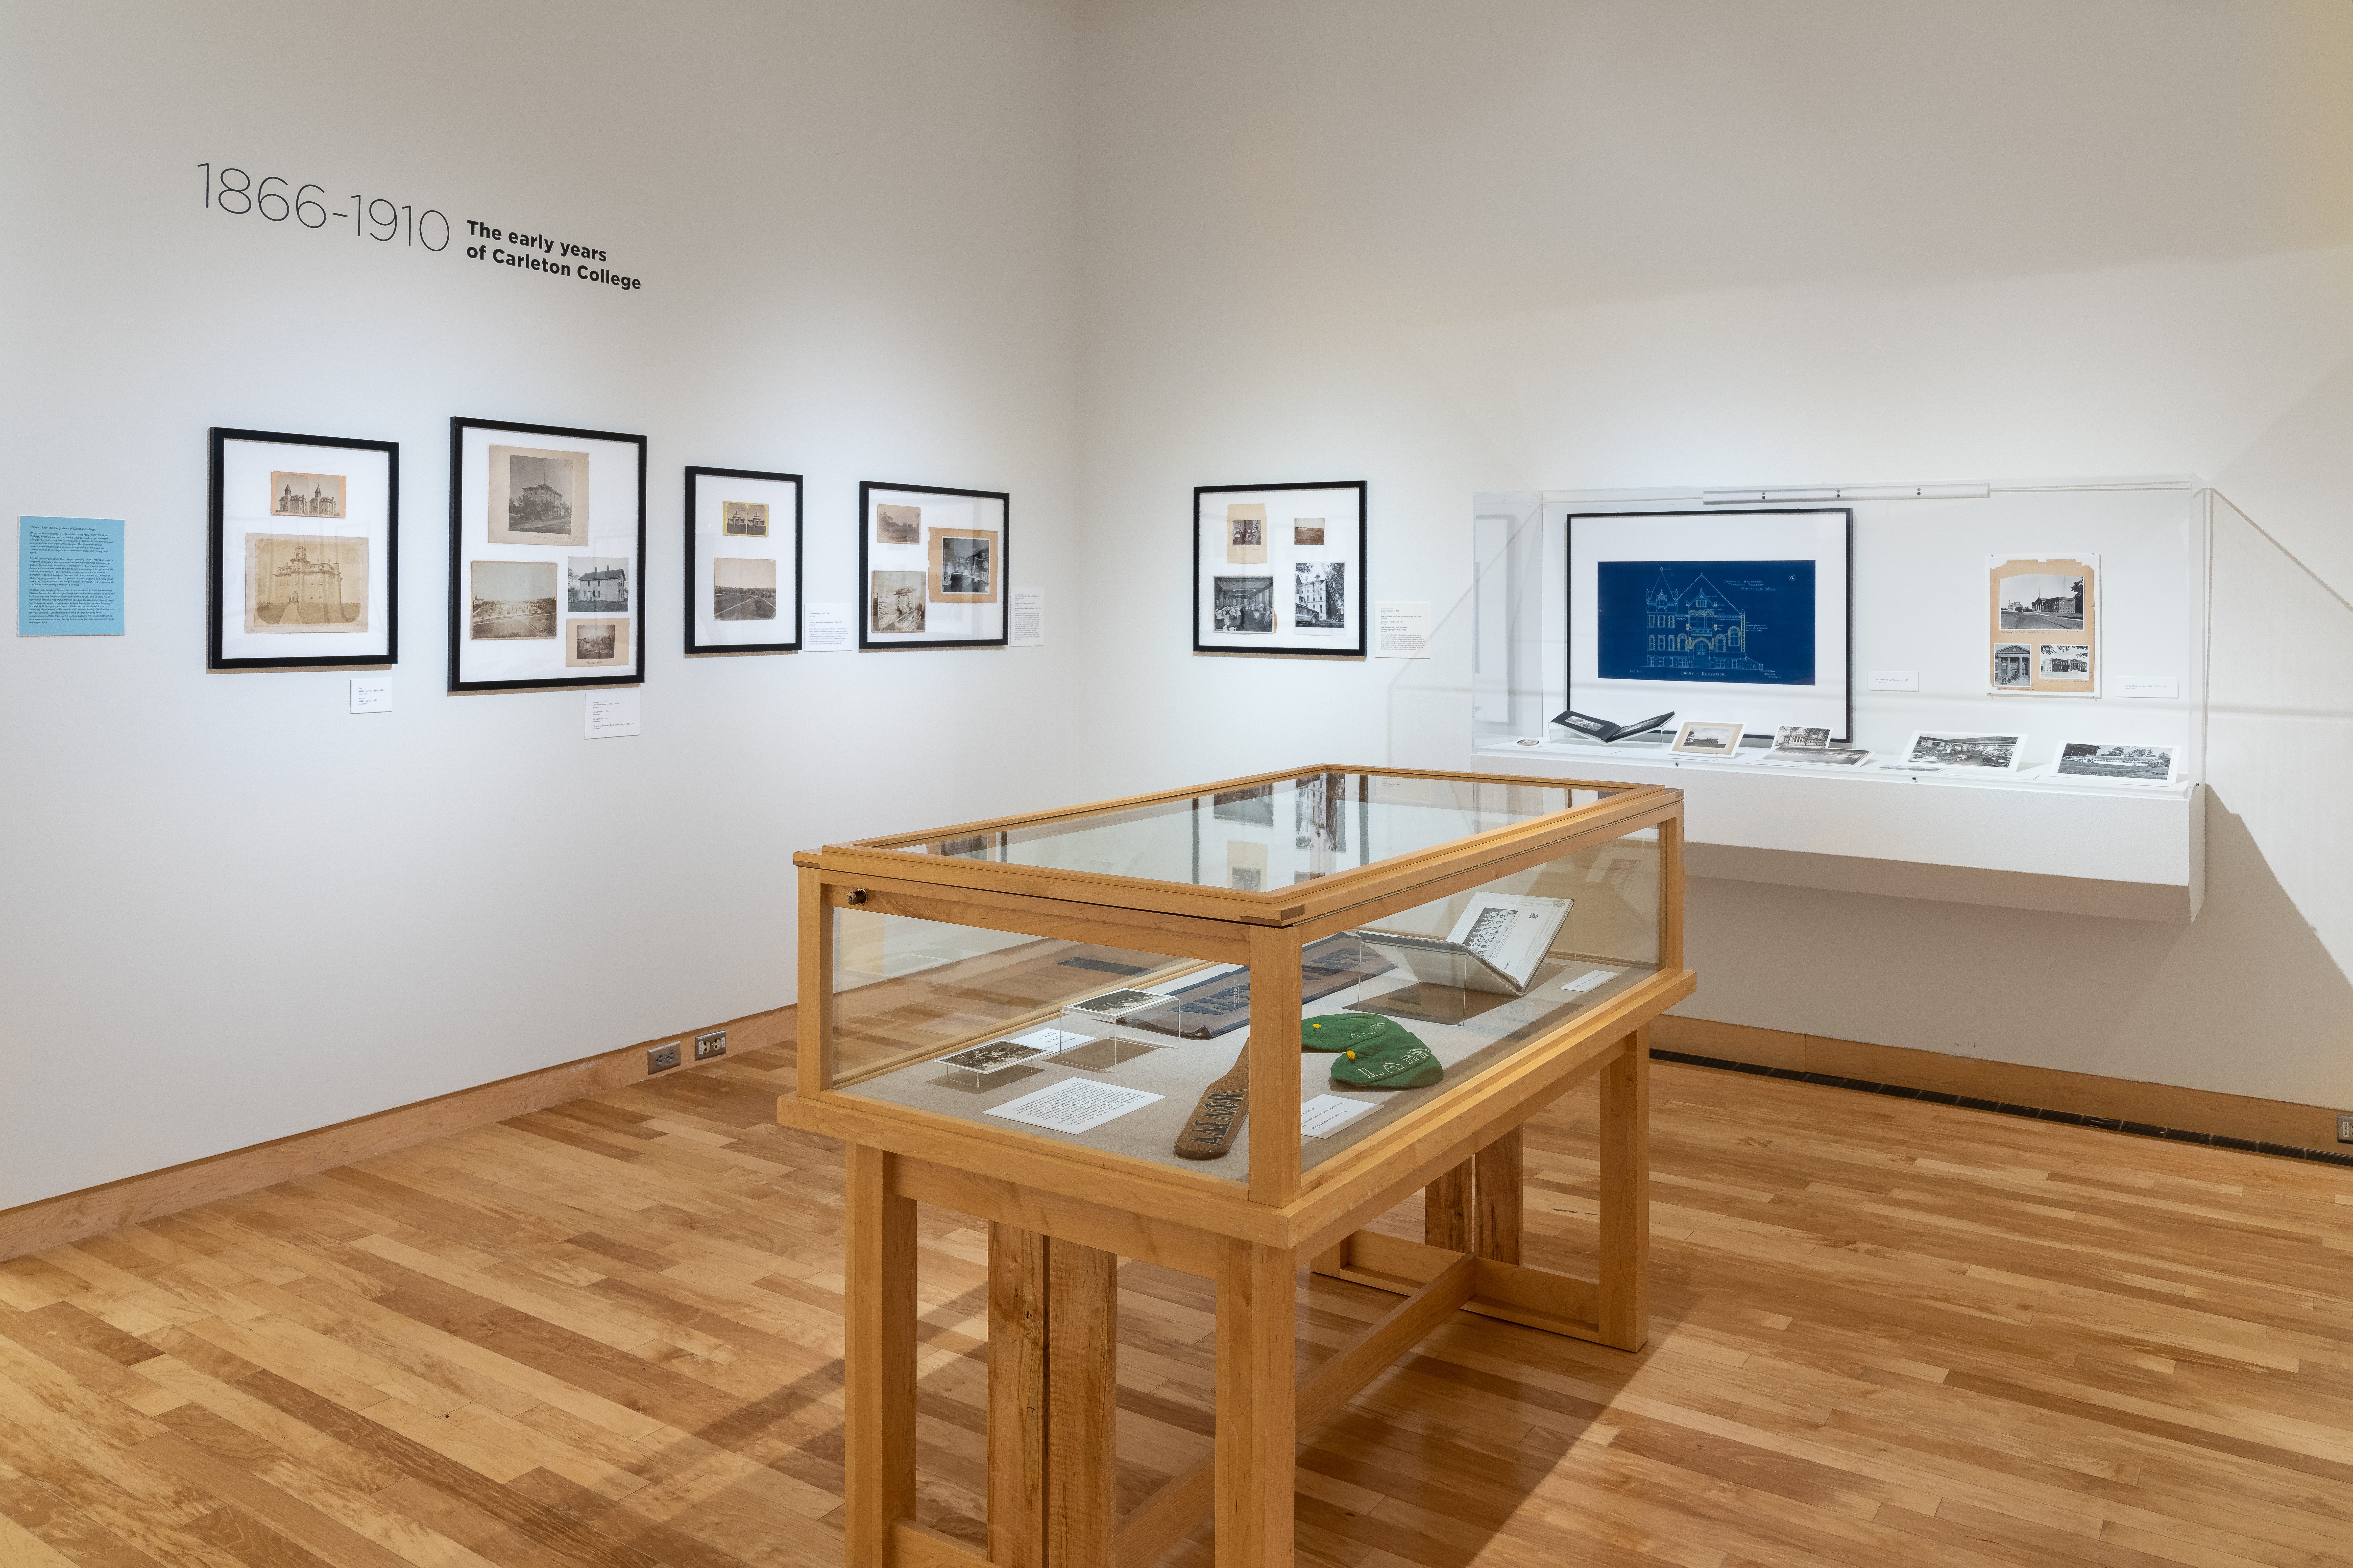 Photograph of a corner of the gallery, with a display case in front of hanging images from 1866-1910